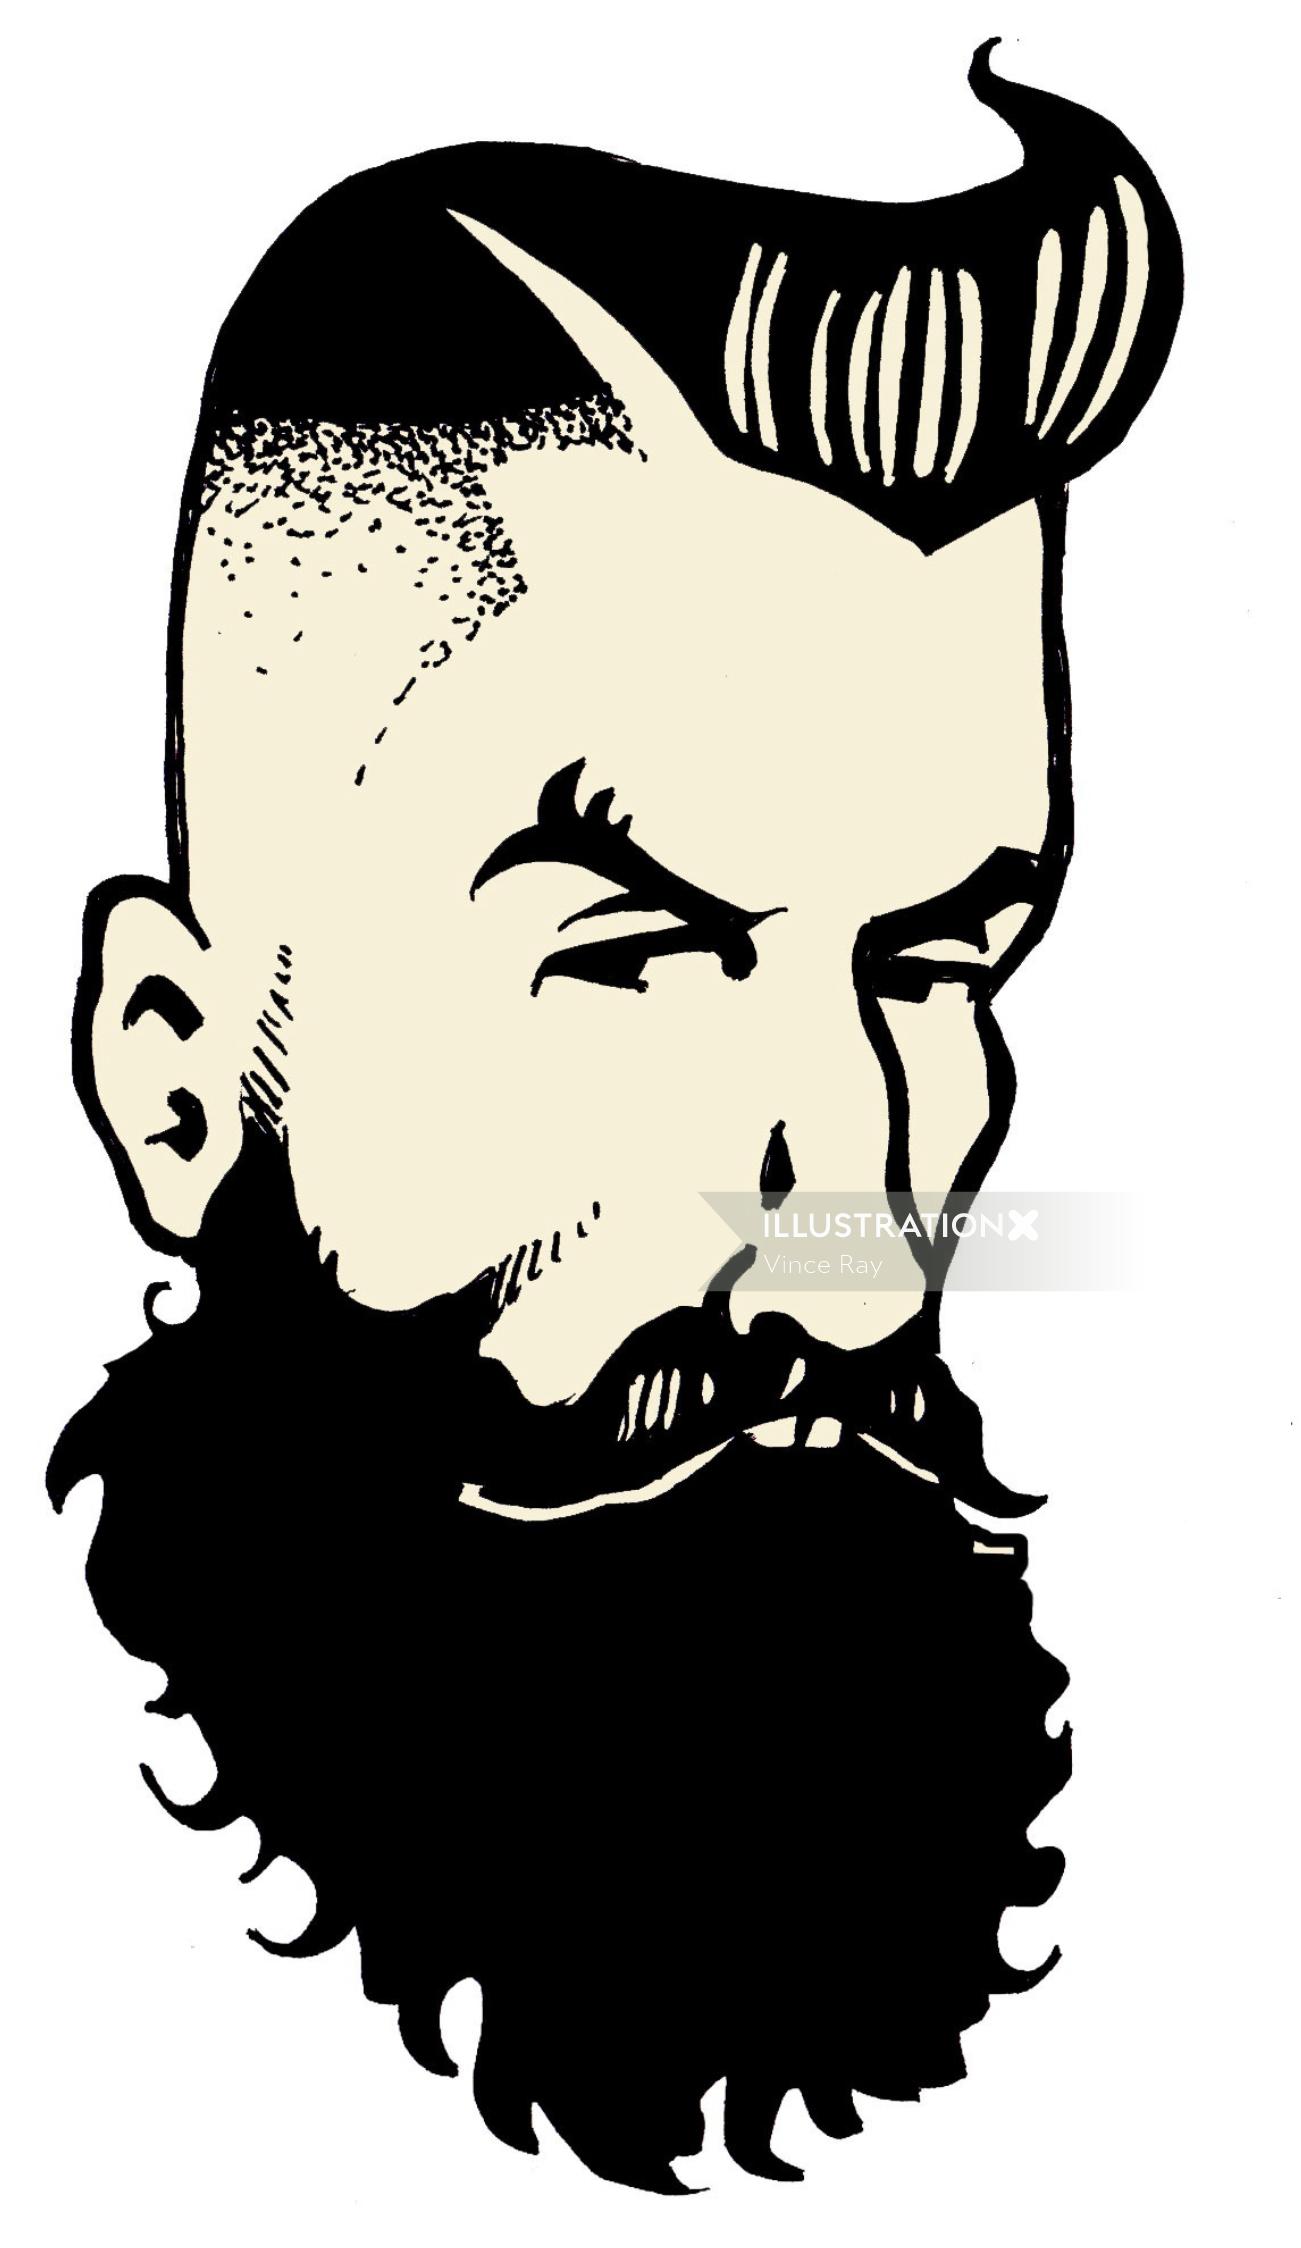 Homme à barbe